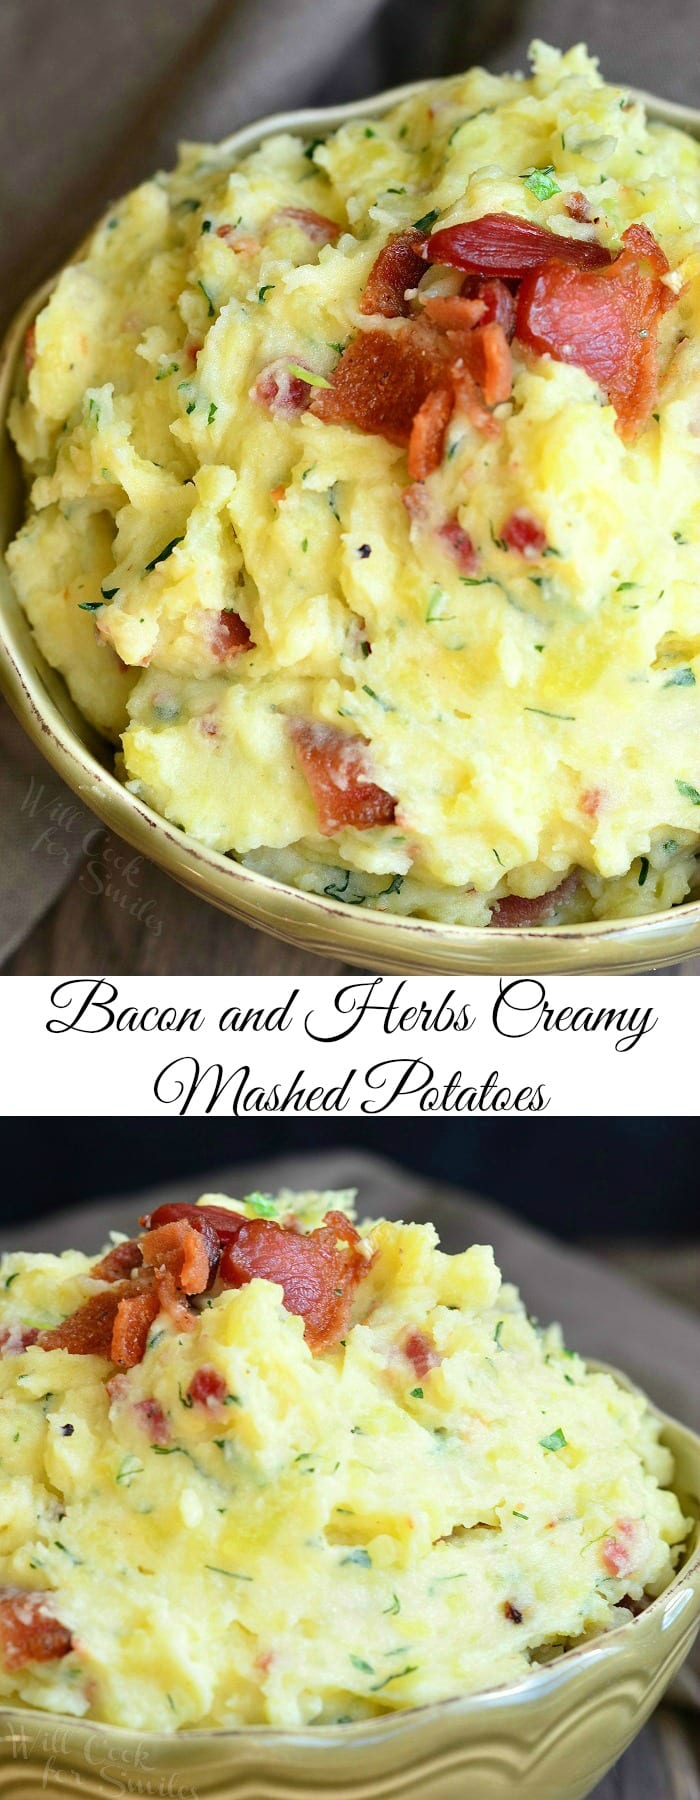 photo collage Mashed Potatoes with bacon and herbs mixed in and bacon on top  in a bowl  